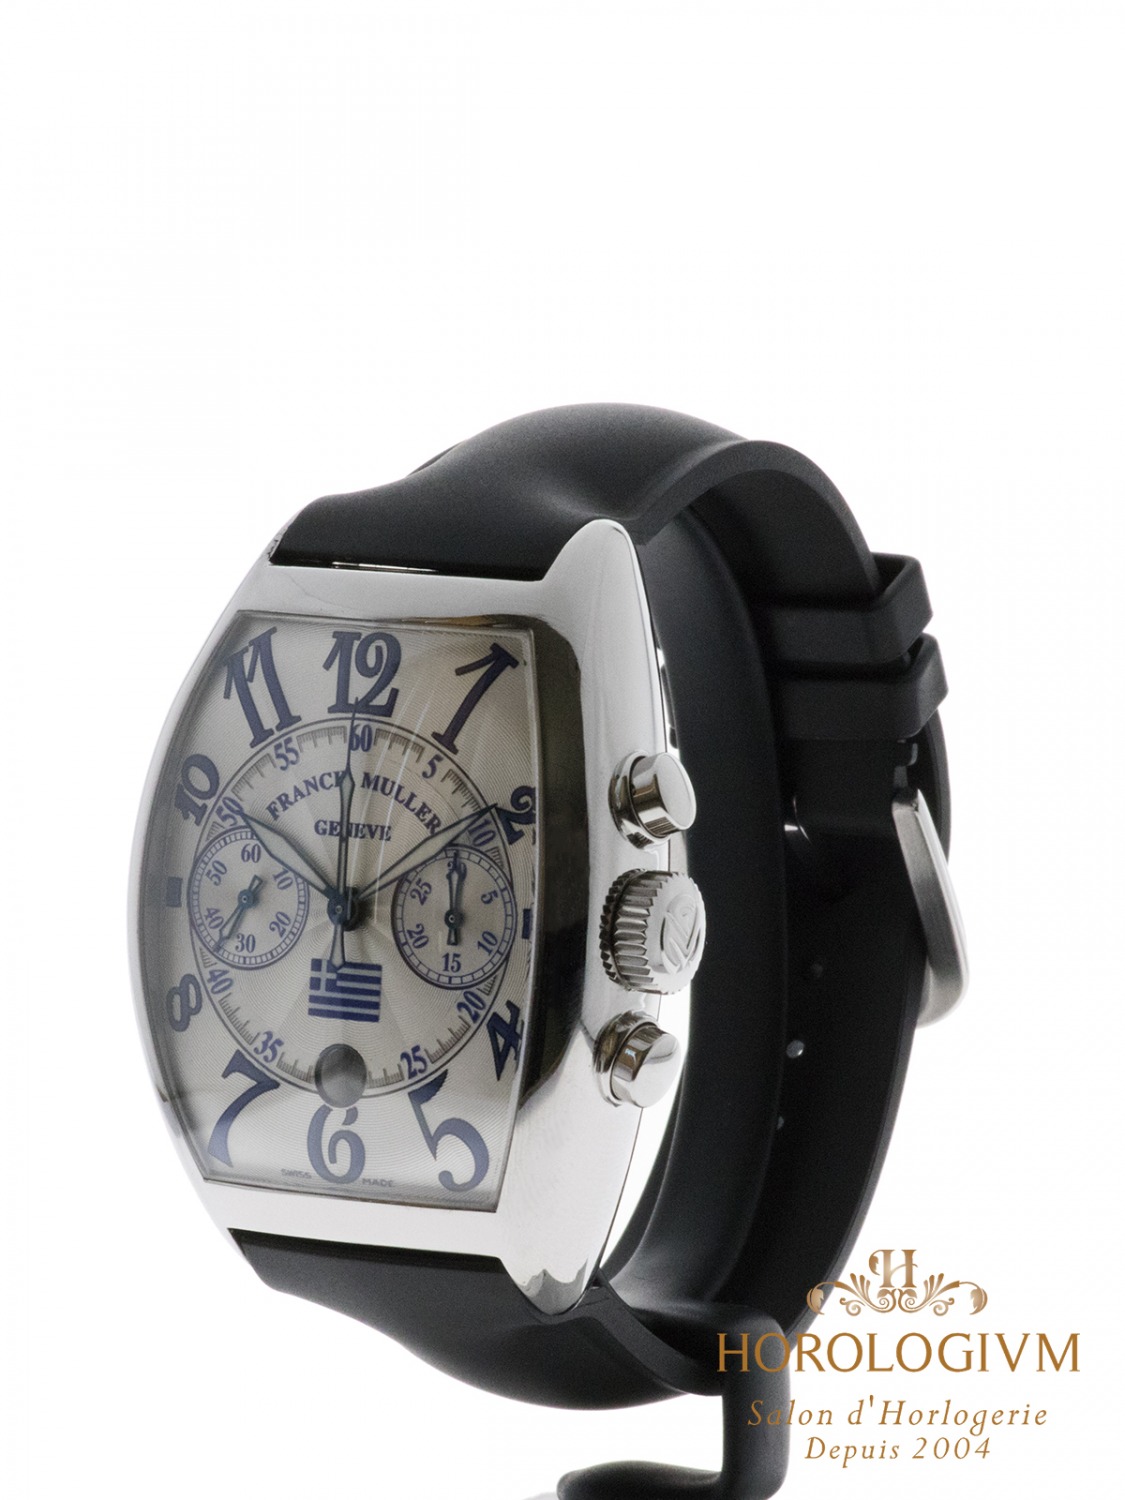 Franck Muller Casablanca Chronograph “Pride of Greece” Ref. 8885 CC DT Limited 50 pcs watch, silver